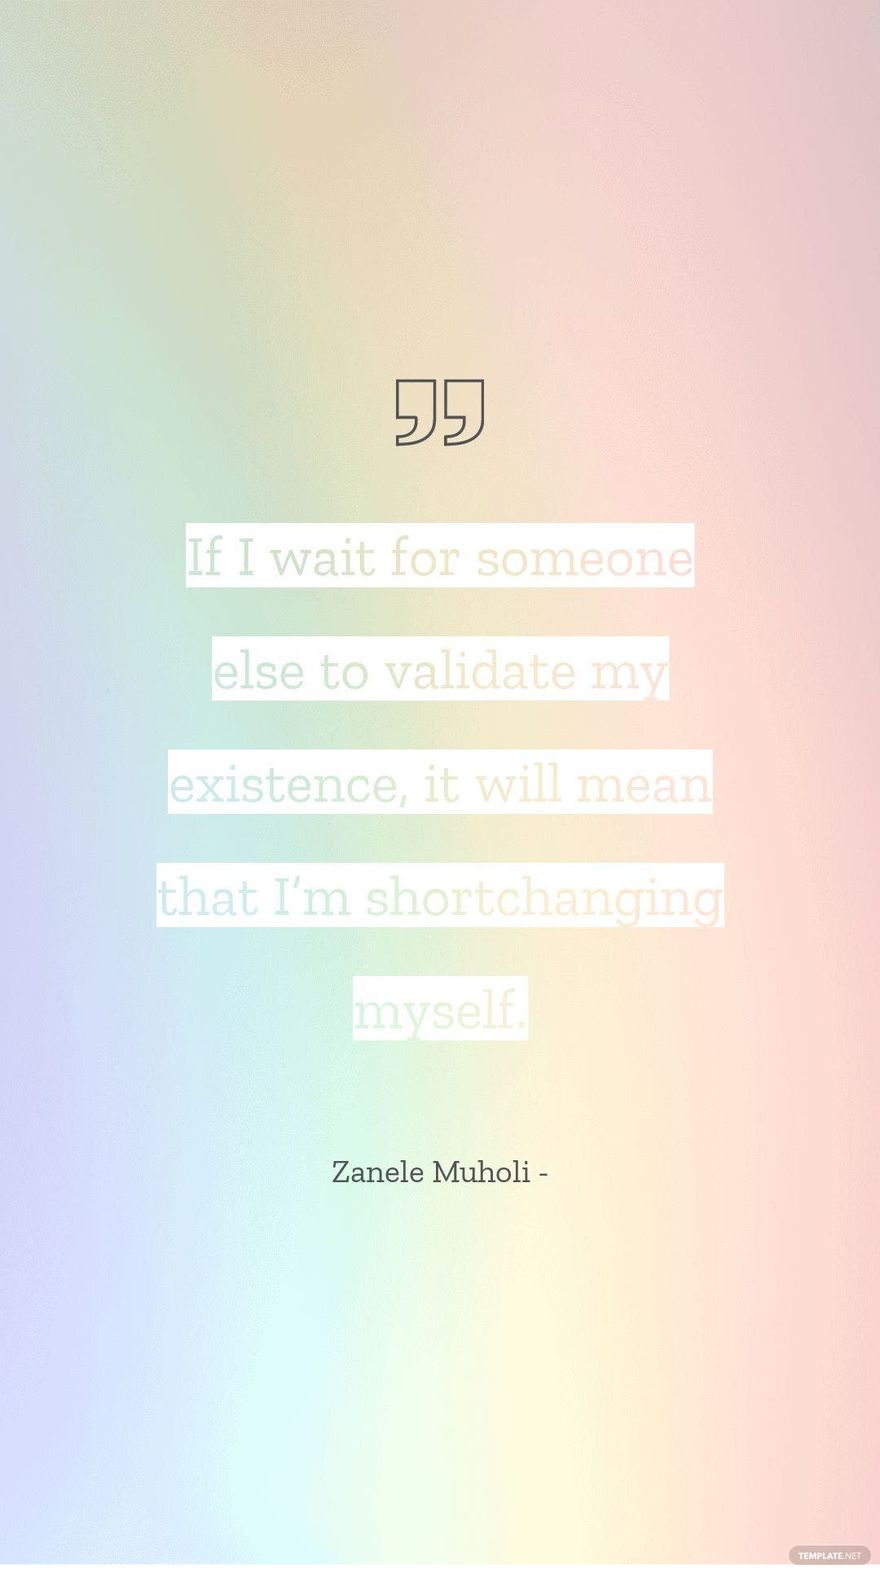 Zanele Muholi - If I wait for someone else to validate my existence, it will mean that I’m shortchanging myself. in JPG